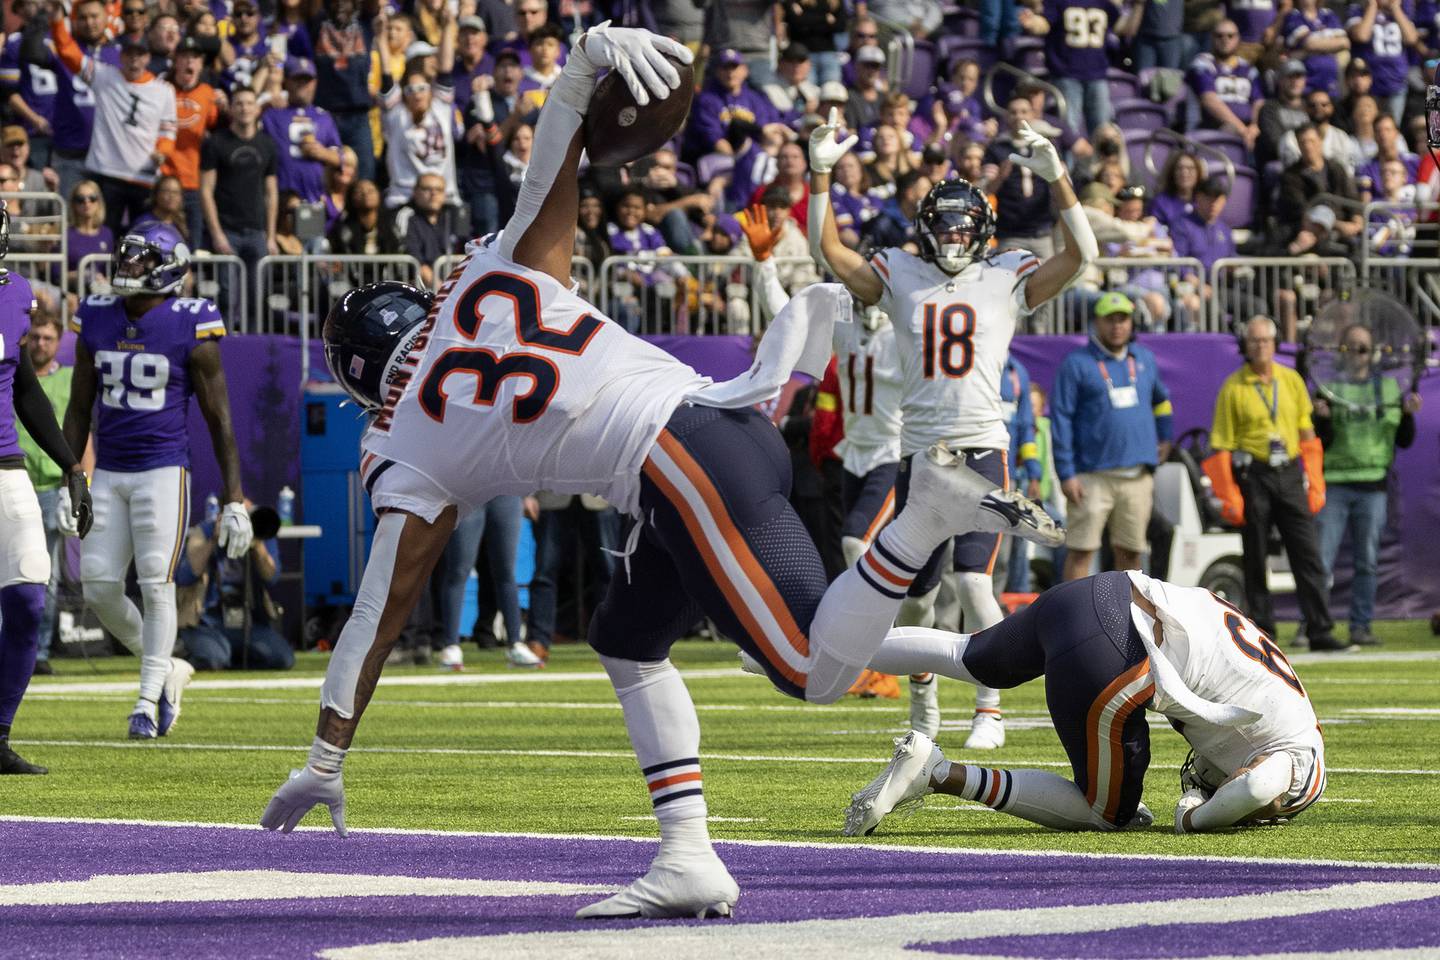 Bears running back David Montgomery scores a touchdown during the second quarter against the Vikings at U.S. Bank Stadium on Oct. 9, 2022.